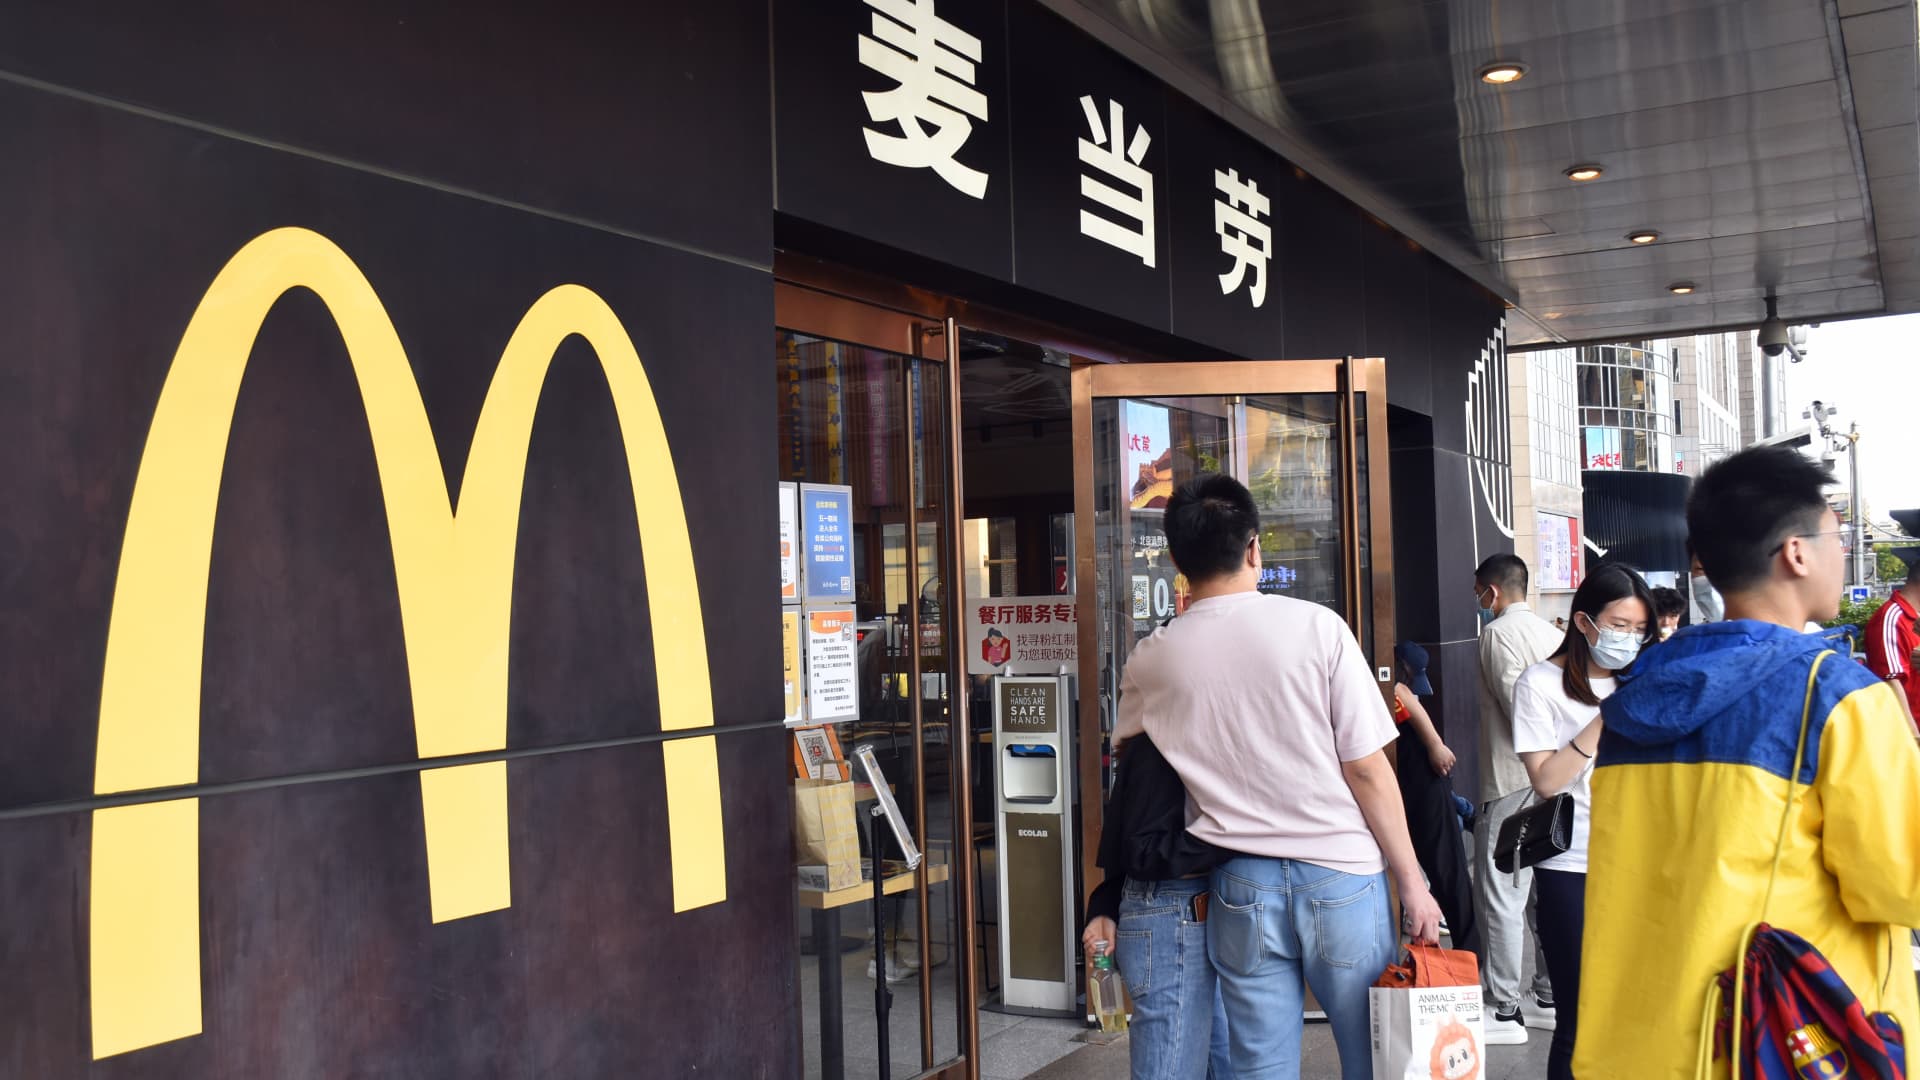 McDonald’s increases minority stake in China business